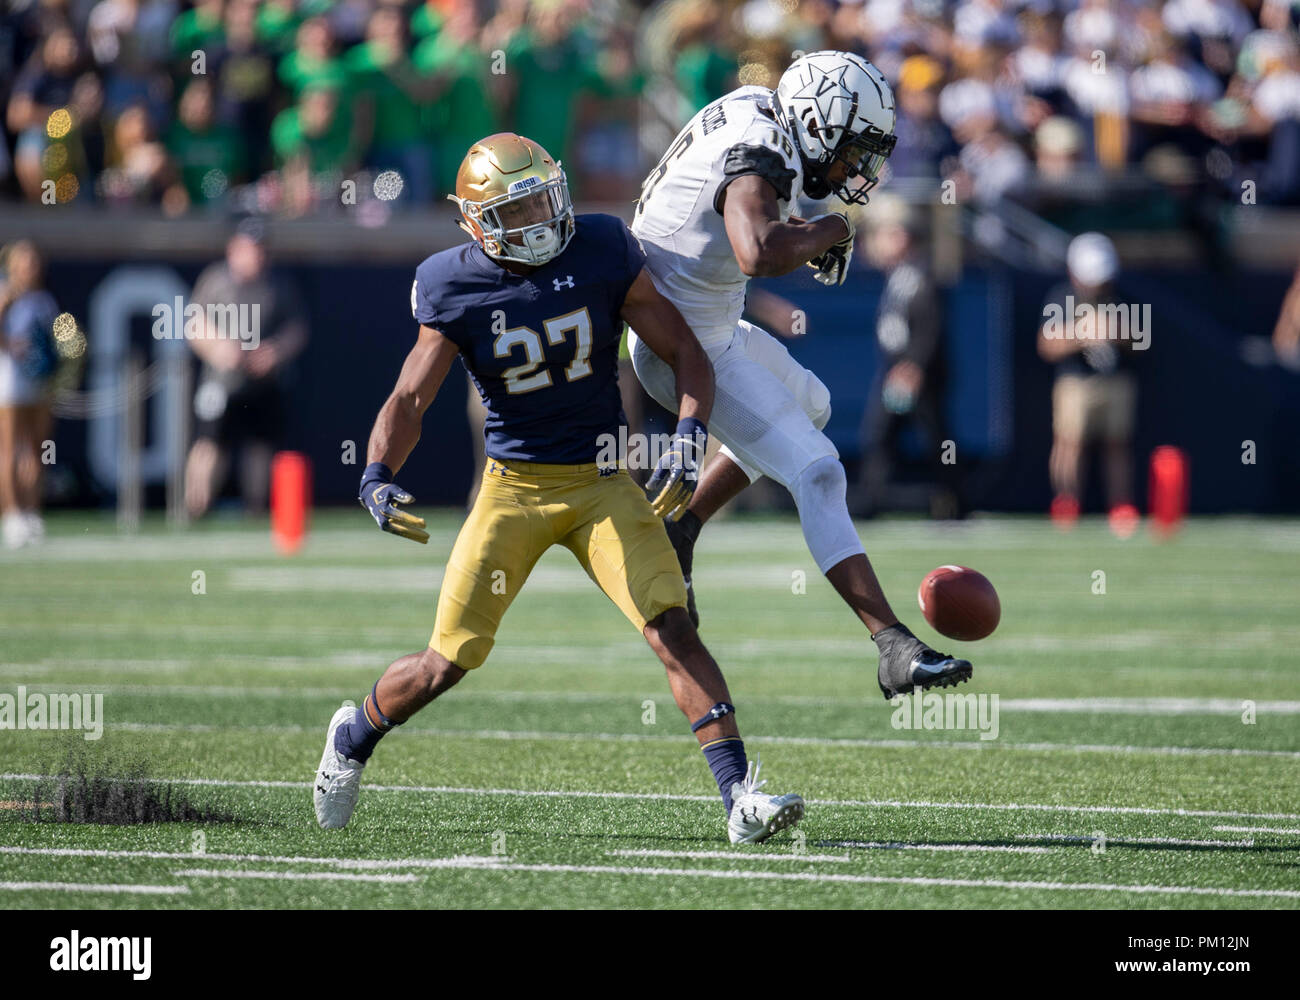 South Bend, Indiana, USA. 15th Sep, 2018. Notre Dame defensive back Julian Love (27) breaks up pass intended for Vanderbilt wide receiver Kalija Lipscomb (16) during NCAA football game action between the Vanderbilt Commodores and the Notre Dame Fighting Irish at Notre Dame Stadium in South Bend, Indiana. Notre Dame defeated Vanderbilt 22-17. John Mersits/CSM/Alamy Live News Stock Photo